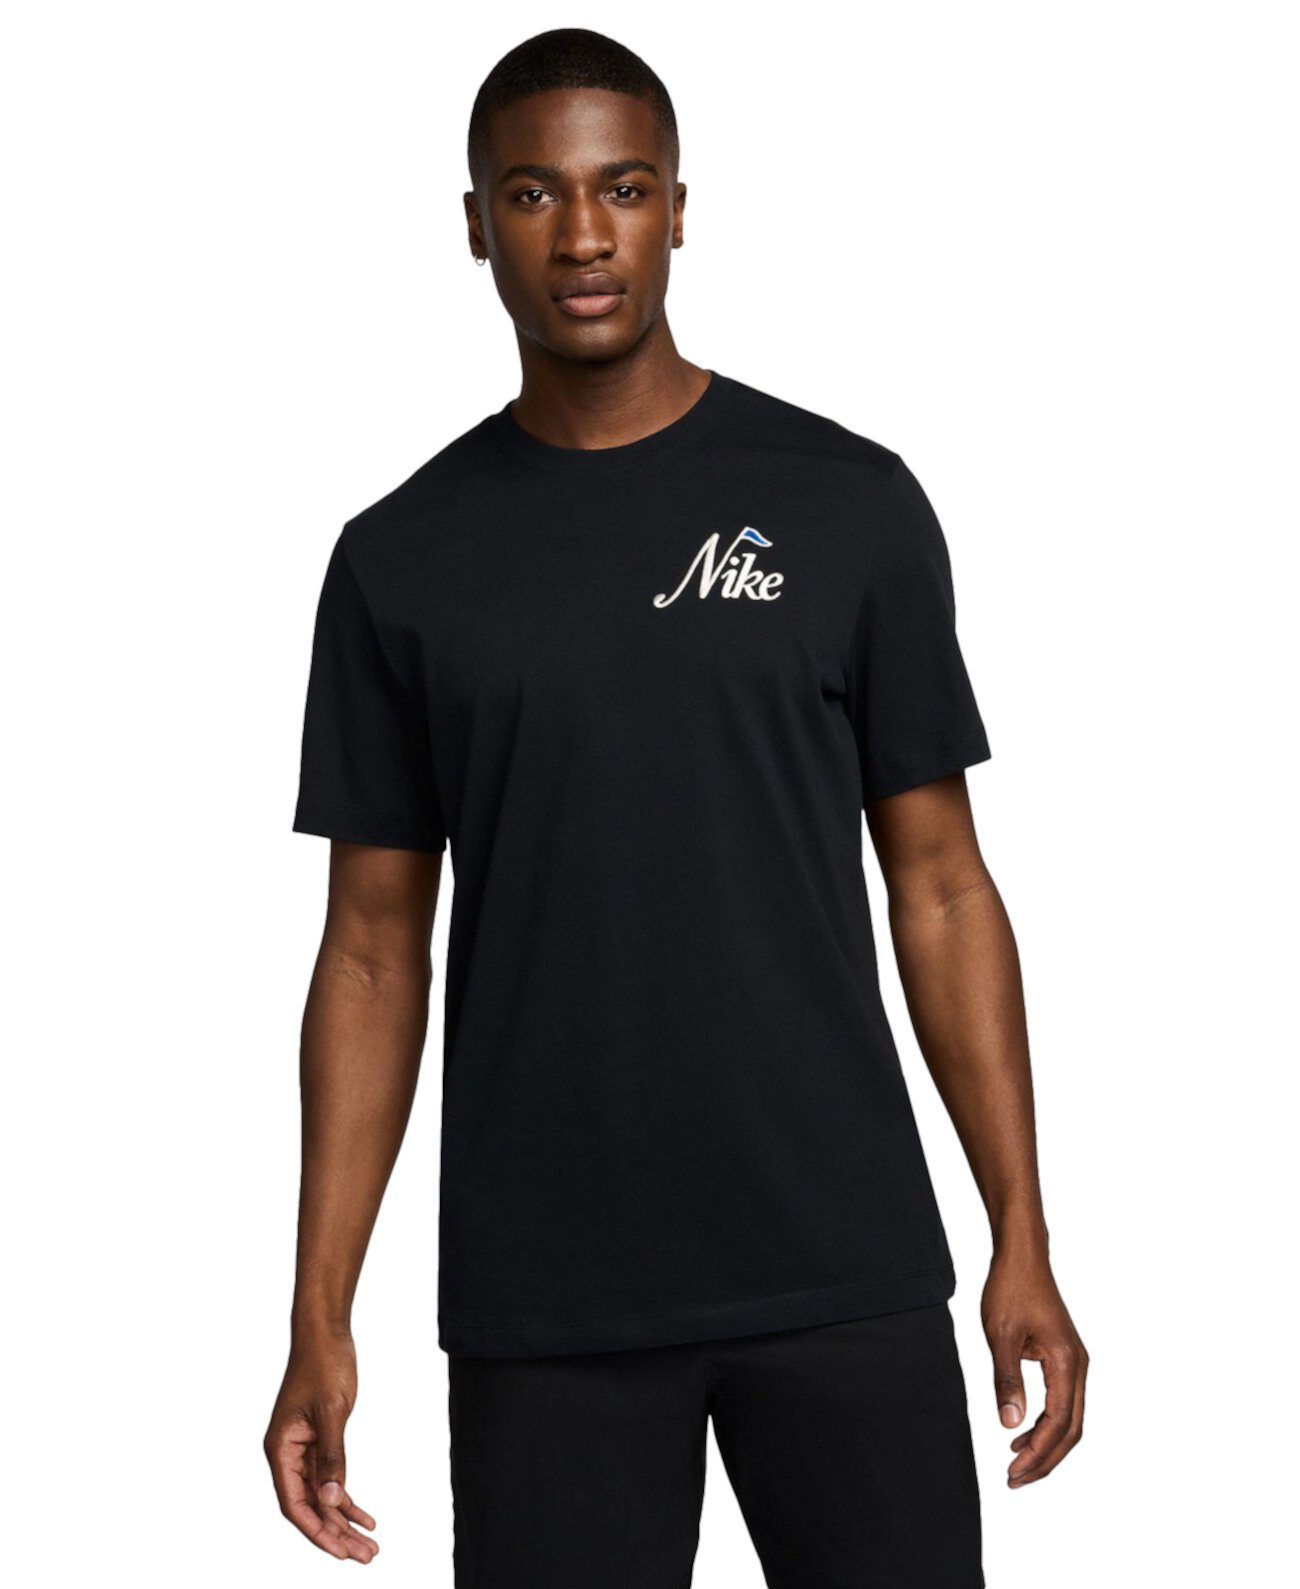 Men's Classic-Fit Embroidered Logo Graphic Golf T-Shirt Nike